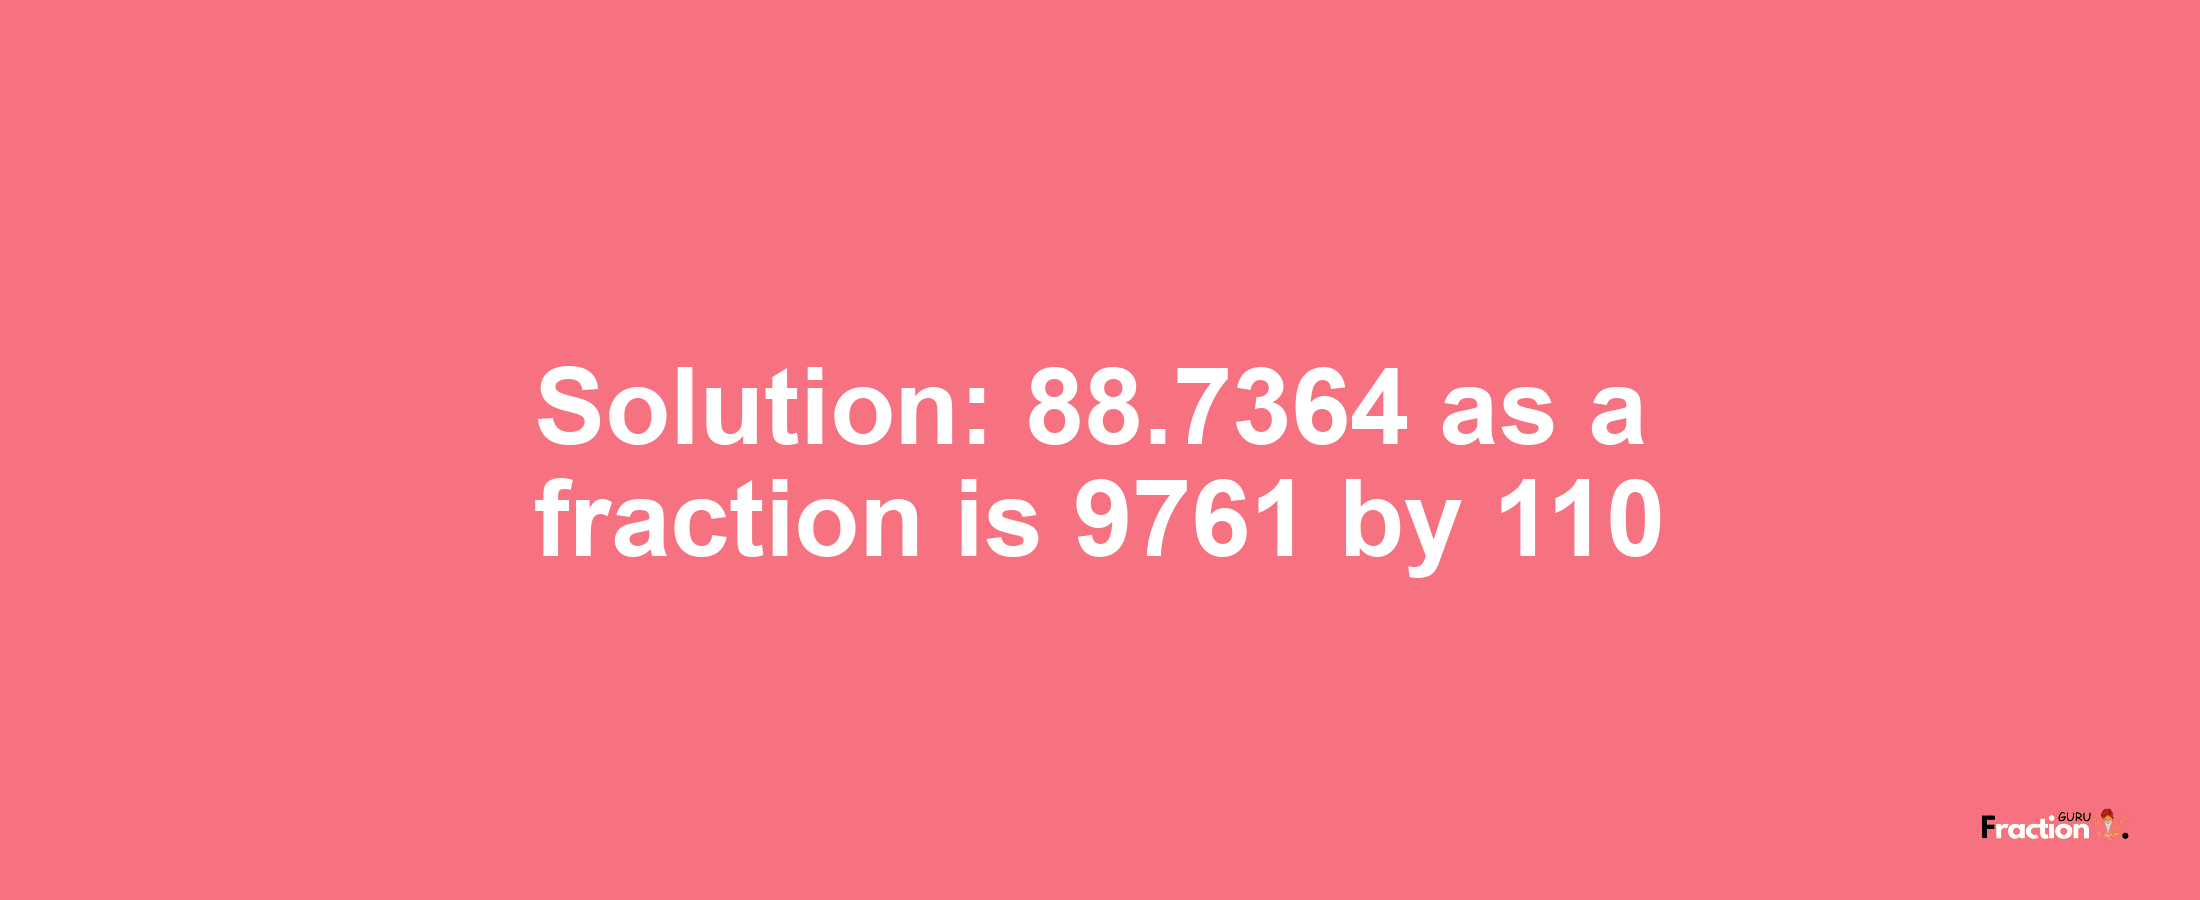 Solution:88.7364 as a fraction is 9761/110